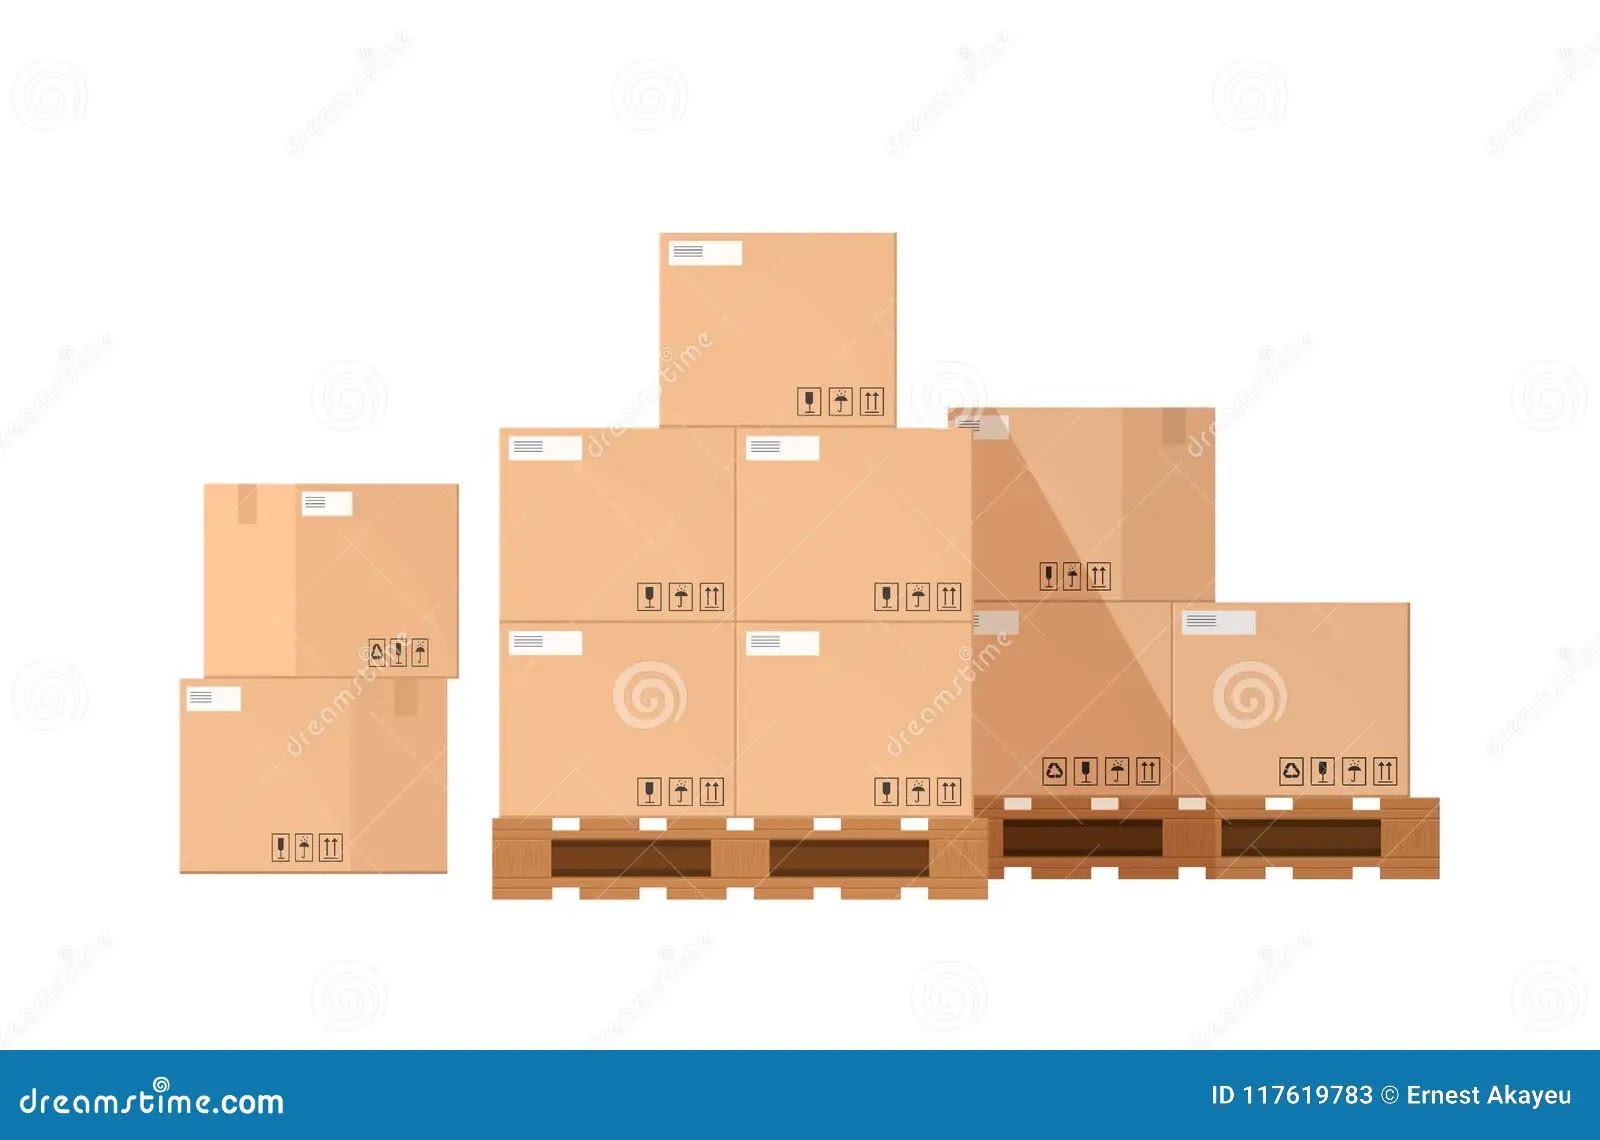 Pile or Stack of Cardboard or Carton Boxes on Wooden Pallet Isolated on